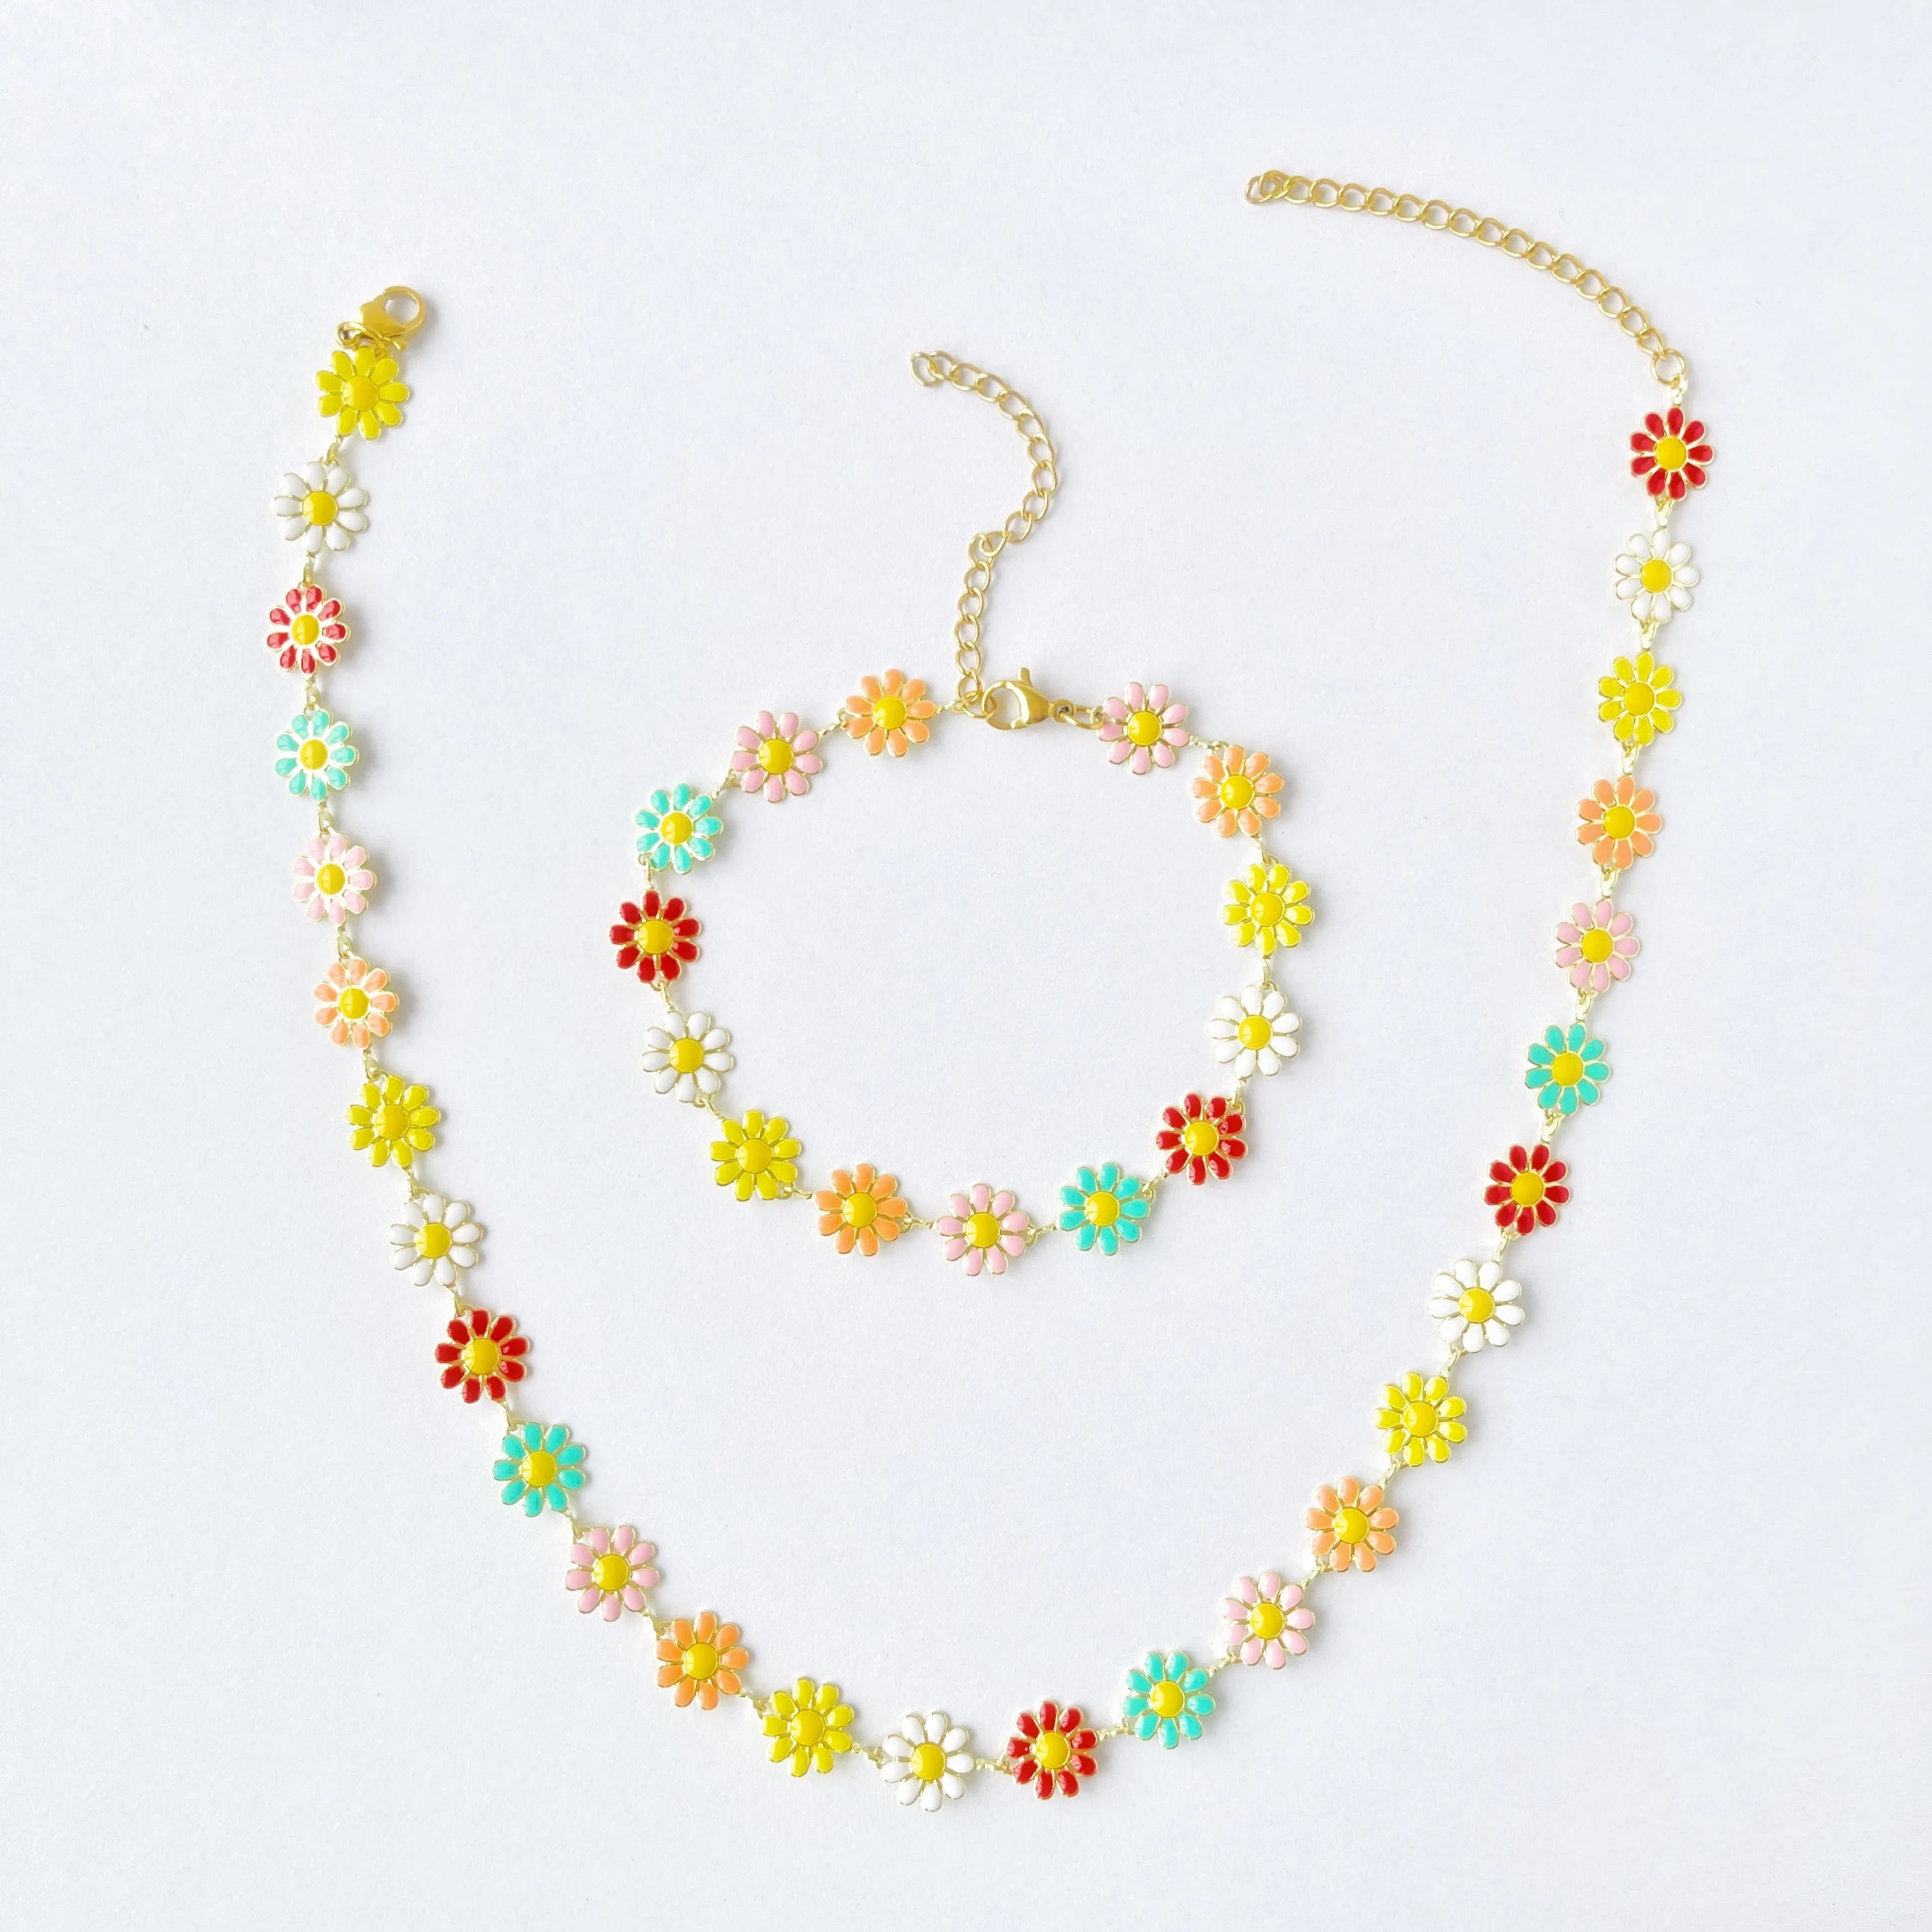 

Hot Sale Bohemian daisy Flower Colorful Charm Statement Choker Necklace Bracelet set for Women Vacation Jewelry, Picture shows